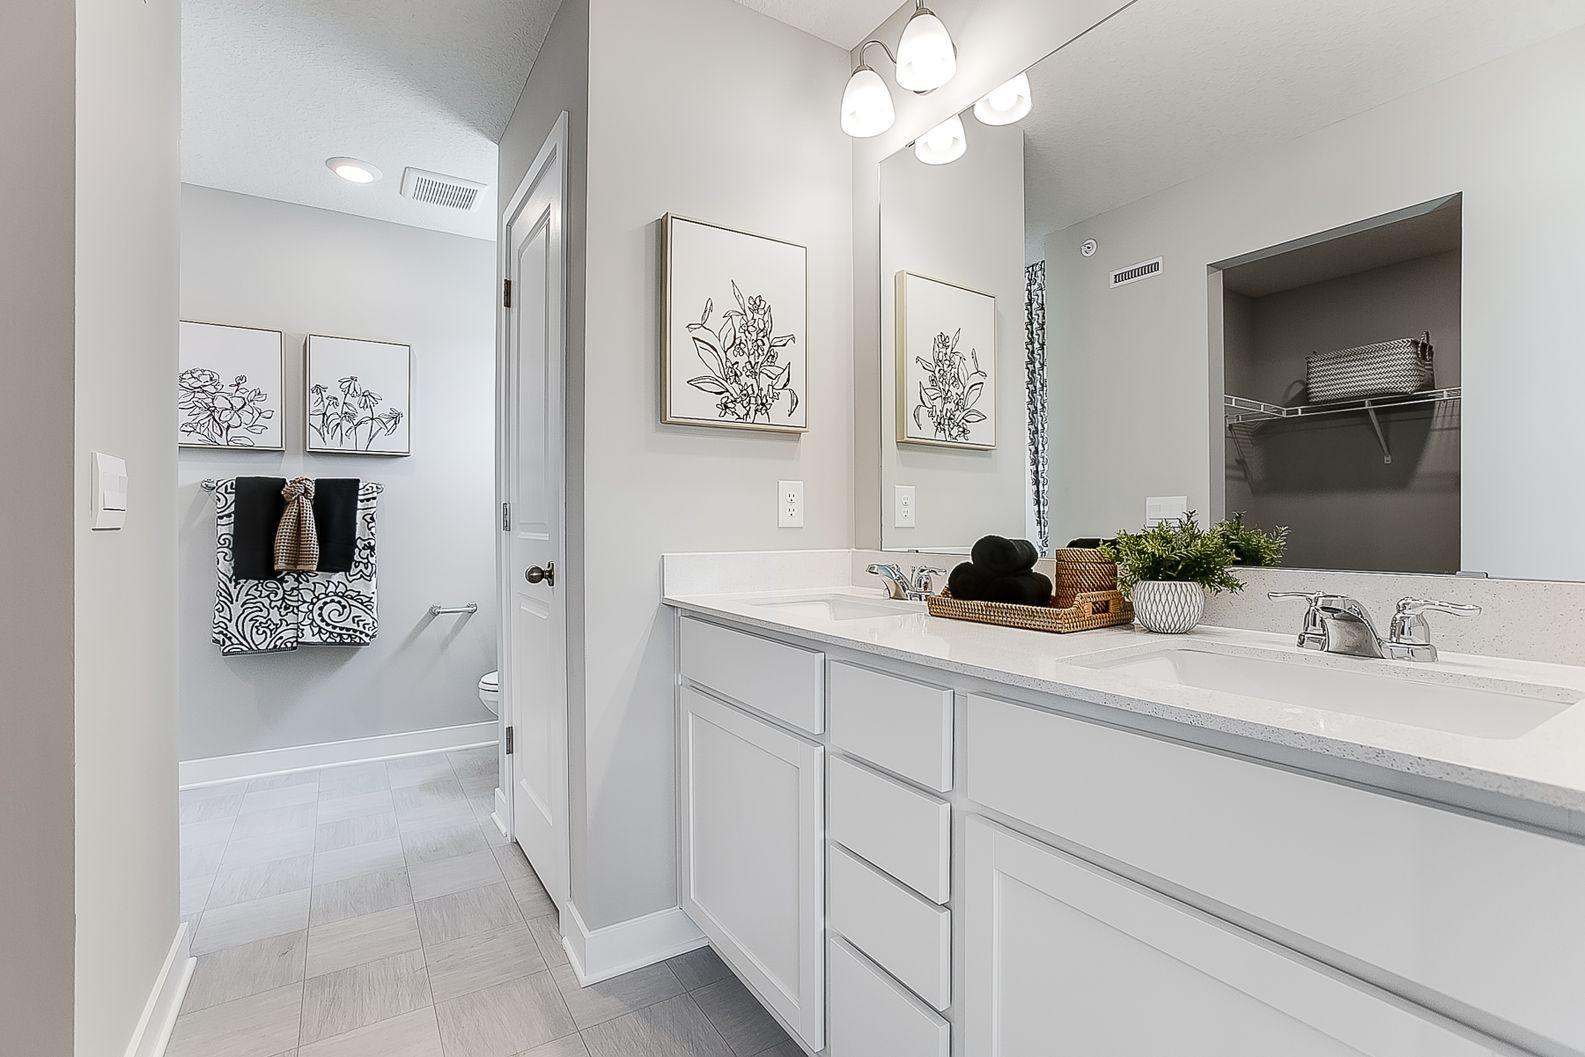 Primary bathroom offers a raised vanity with 2 sinks, Quartz counters and linen storage.